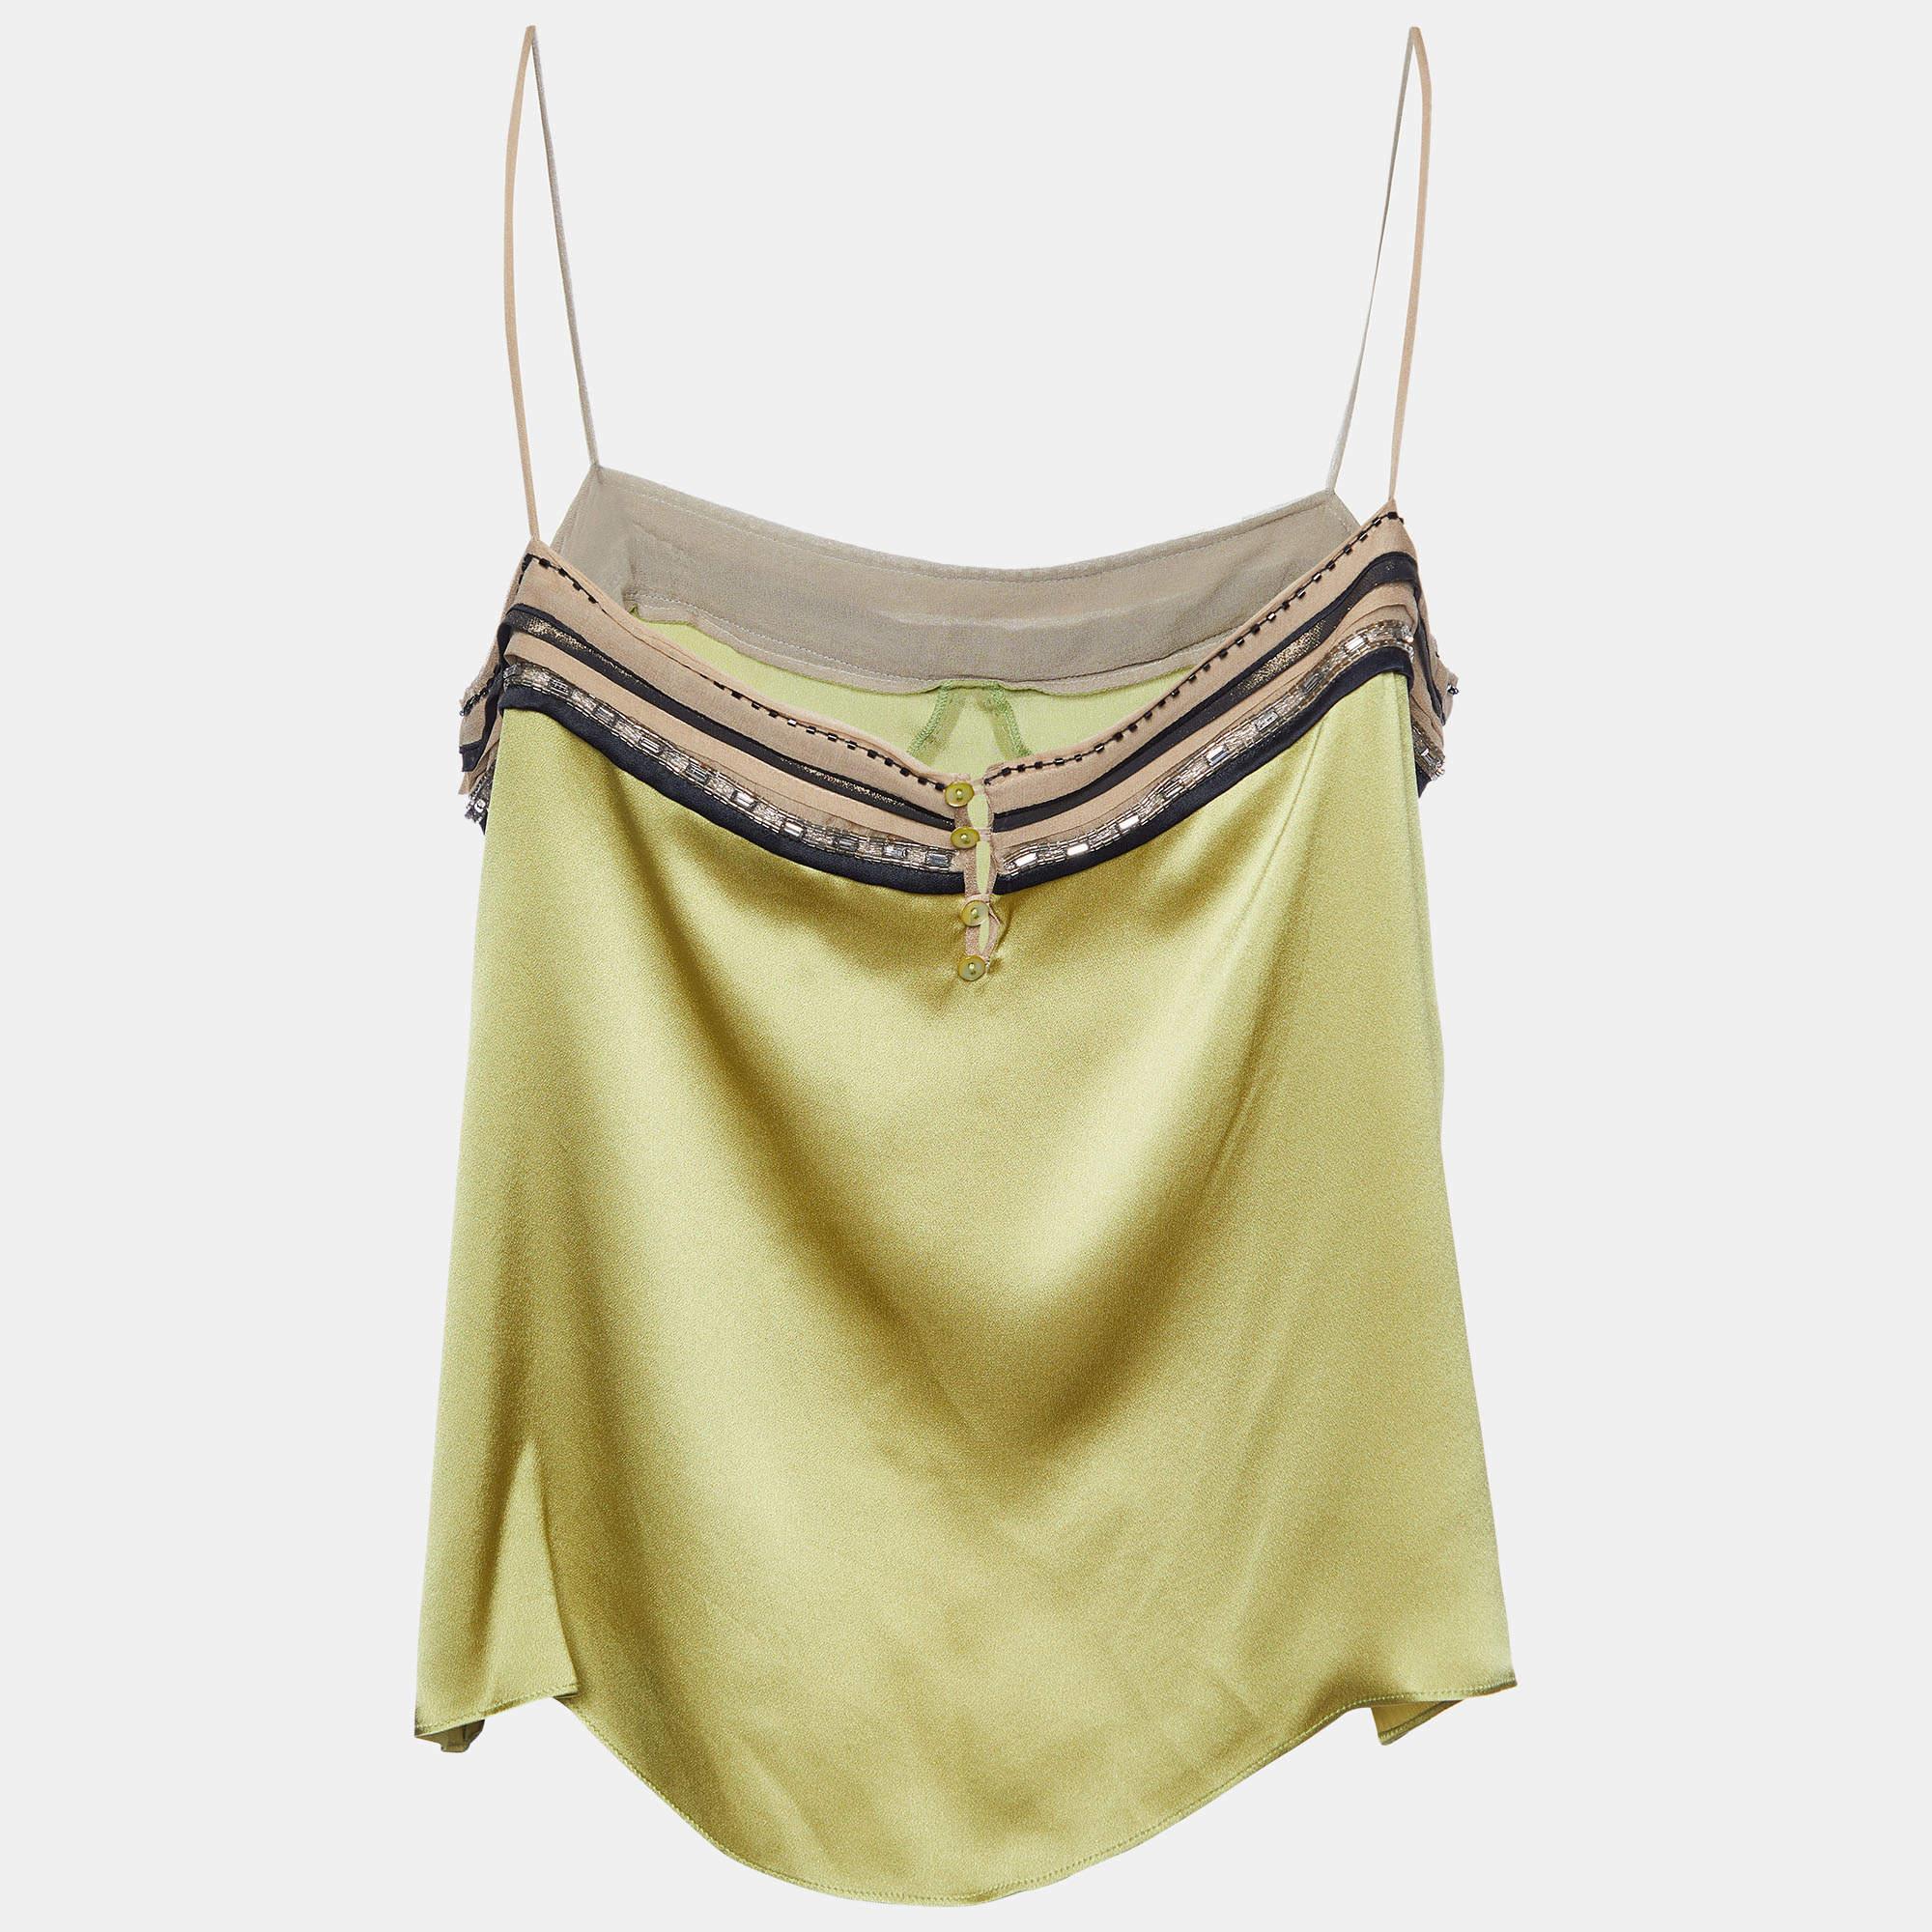 The Chloé cami top is a luxurious and elegant garment. Crafted from lustrous satin silk, it features delicate bead and sequin embellishments along the neckline, adding a touch of sophistication. The rich green hue exudes a sense of opulence and